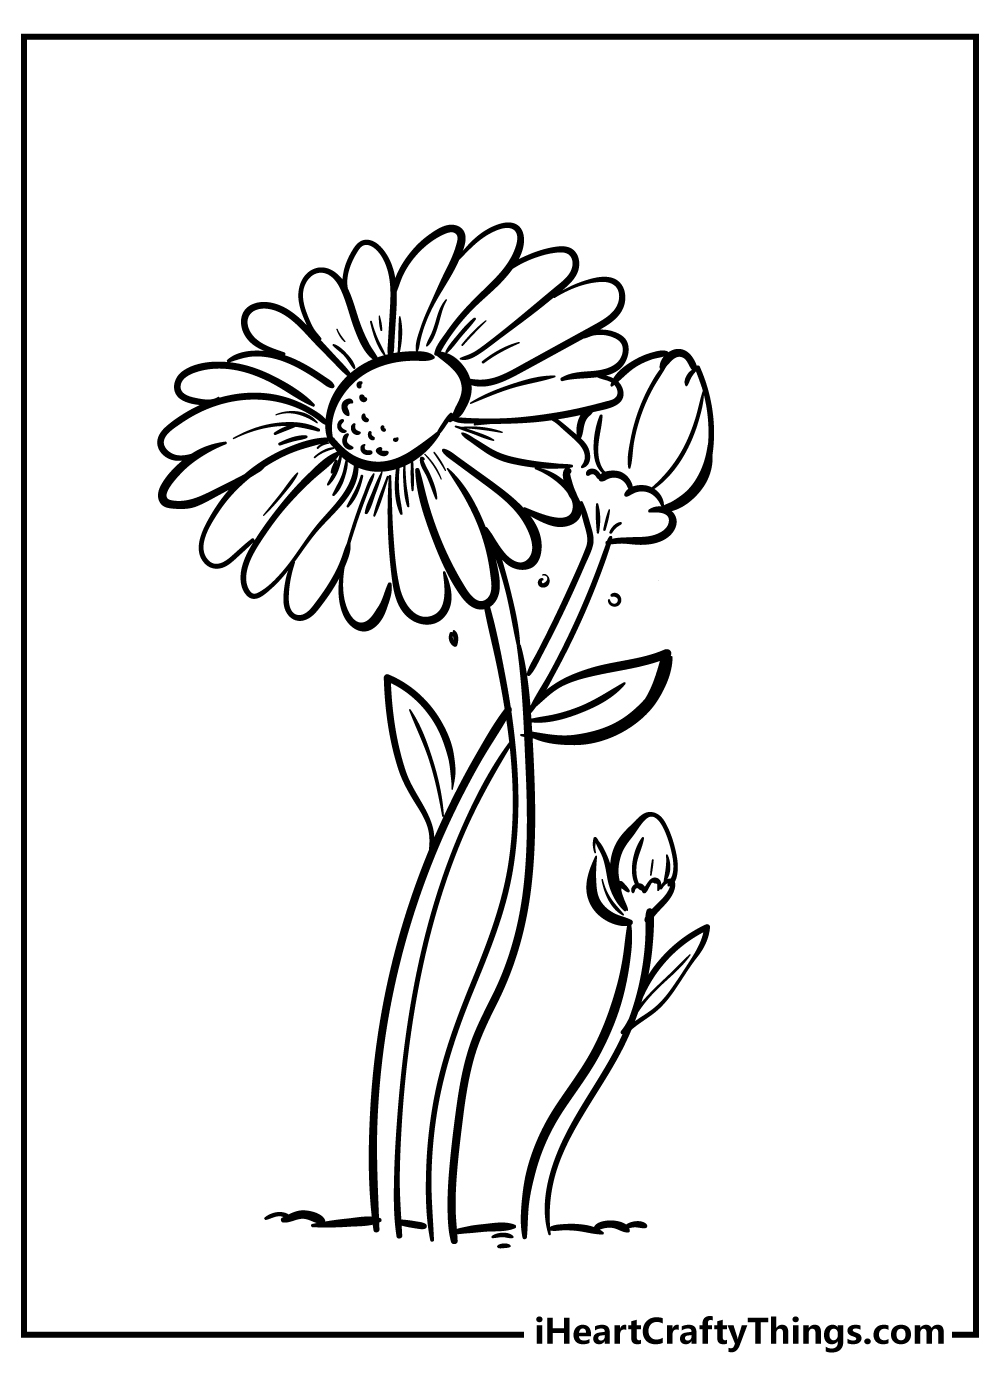 Daisy Coloring Book free printable